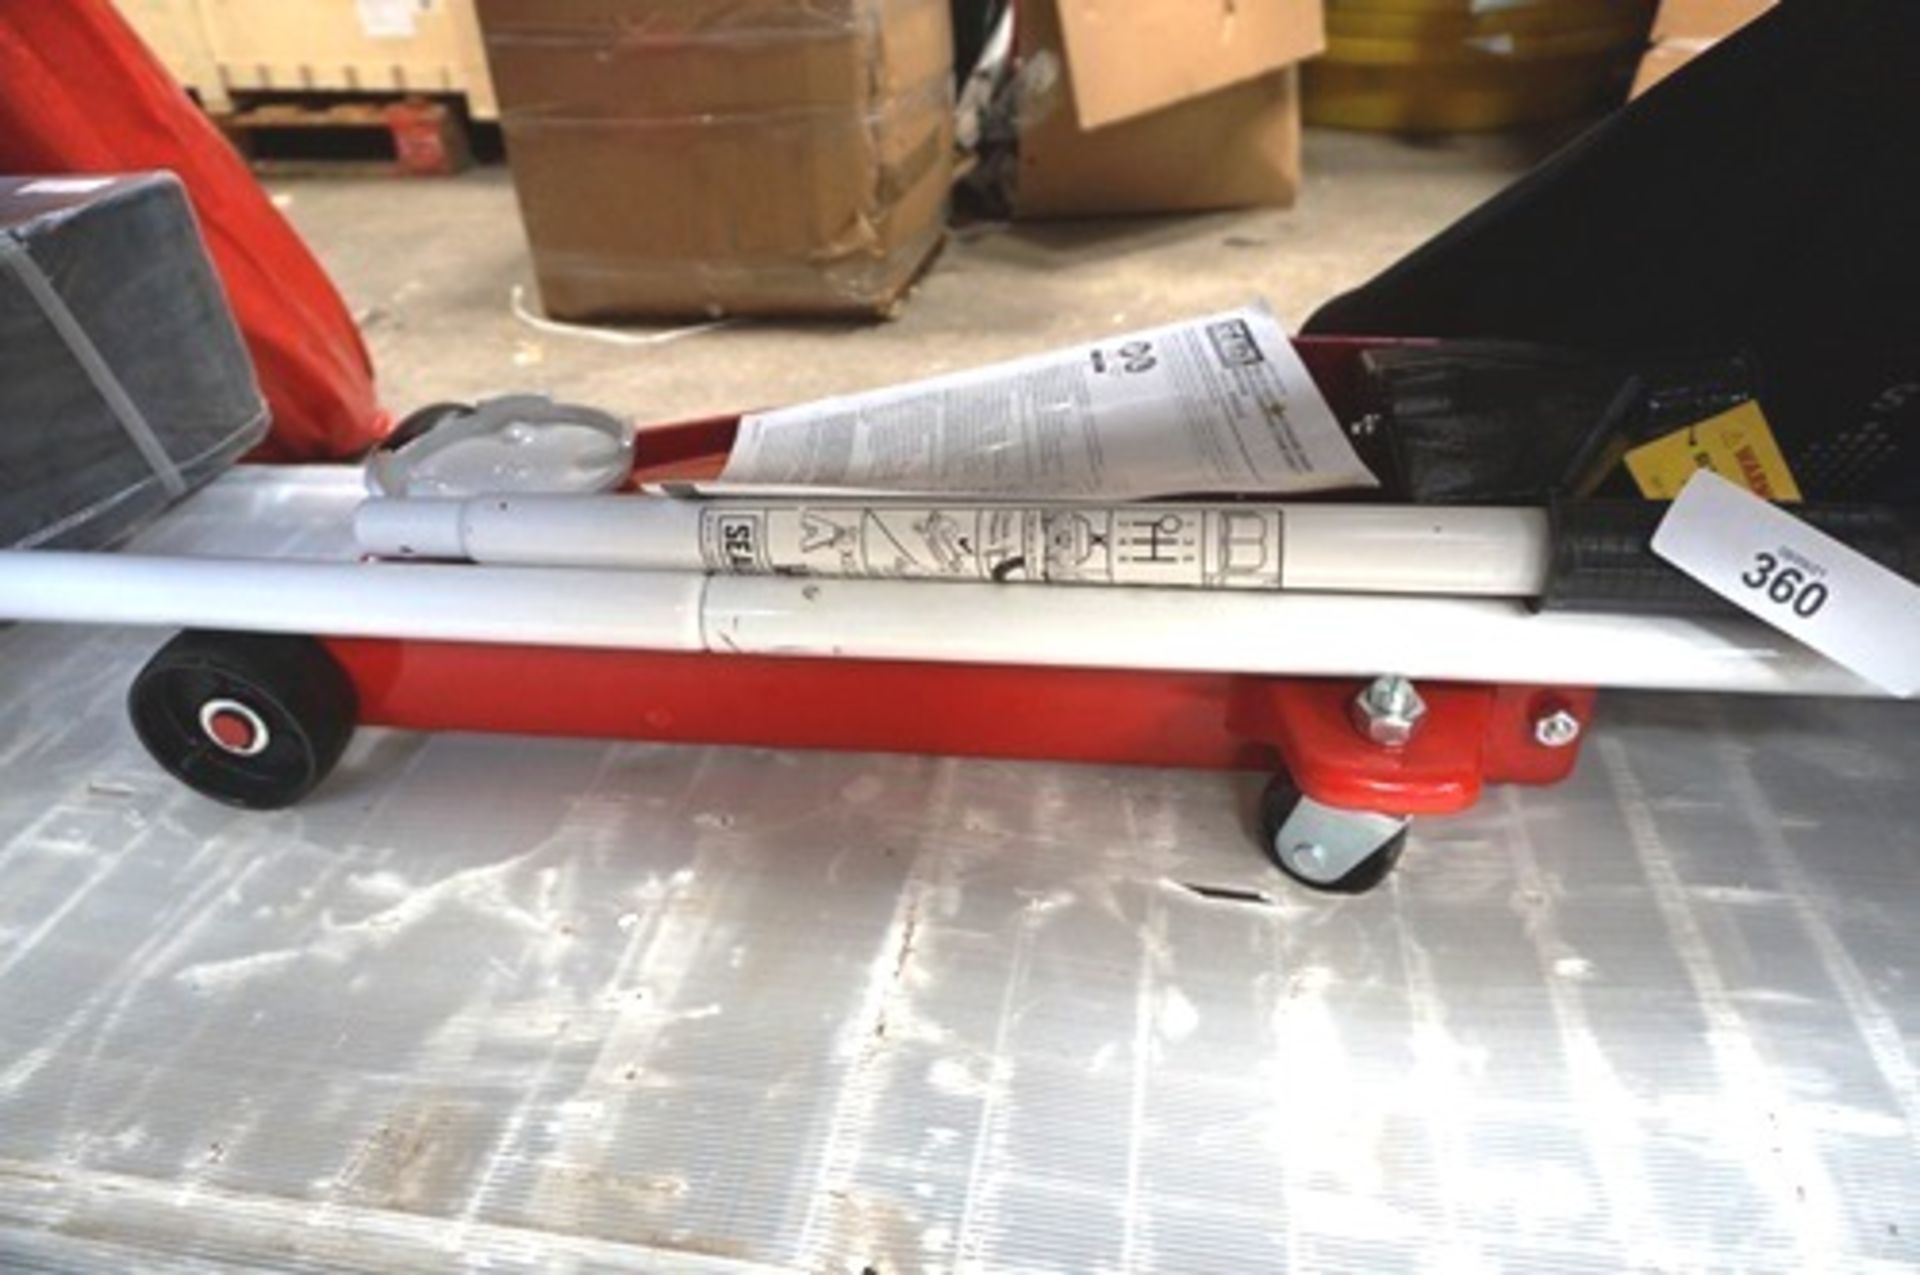 1 x Sealey trolley jack, 3 tonne standard chassis, model 3010CX.V2 - New, unboxed (GS6)